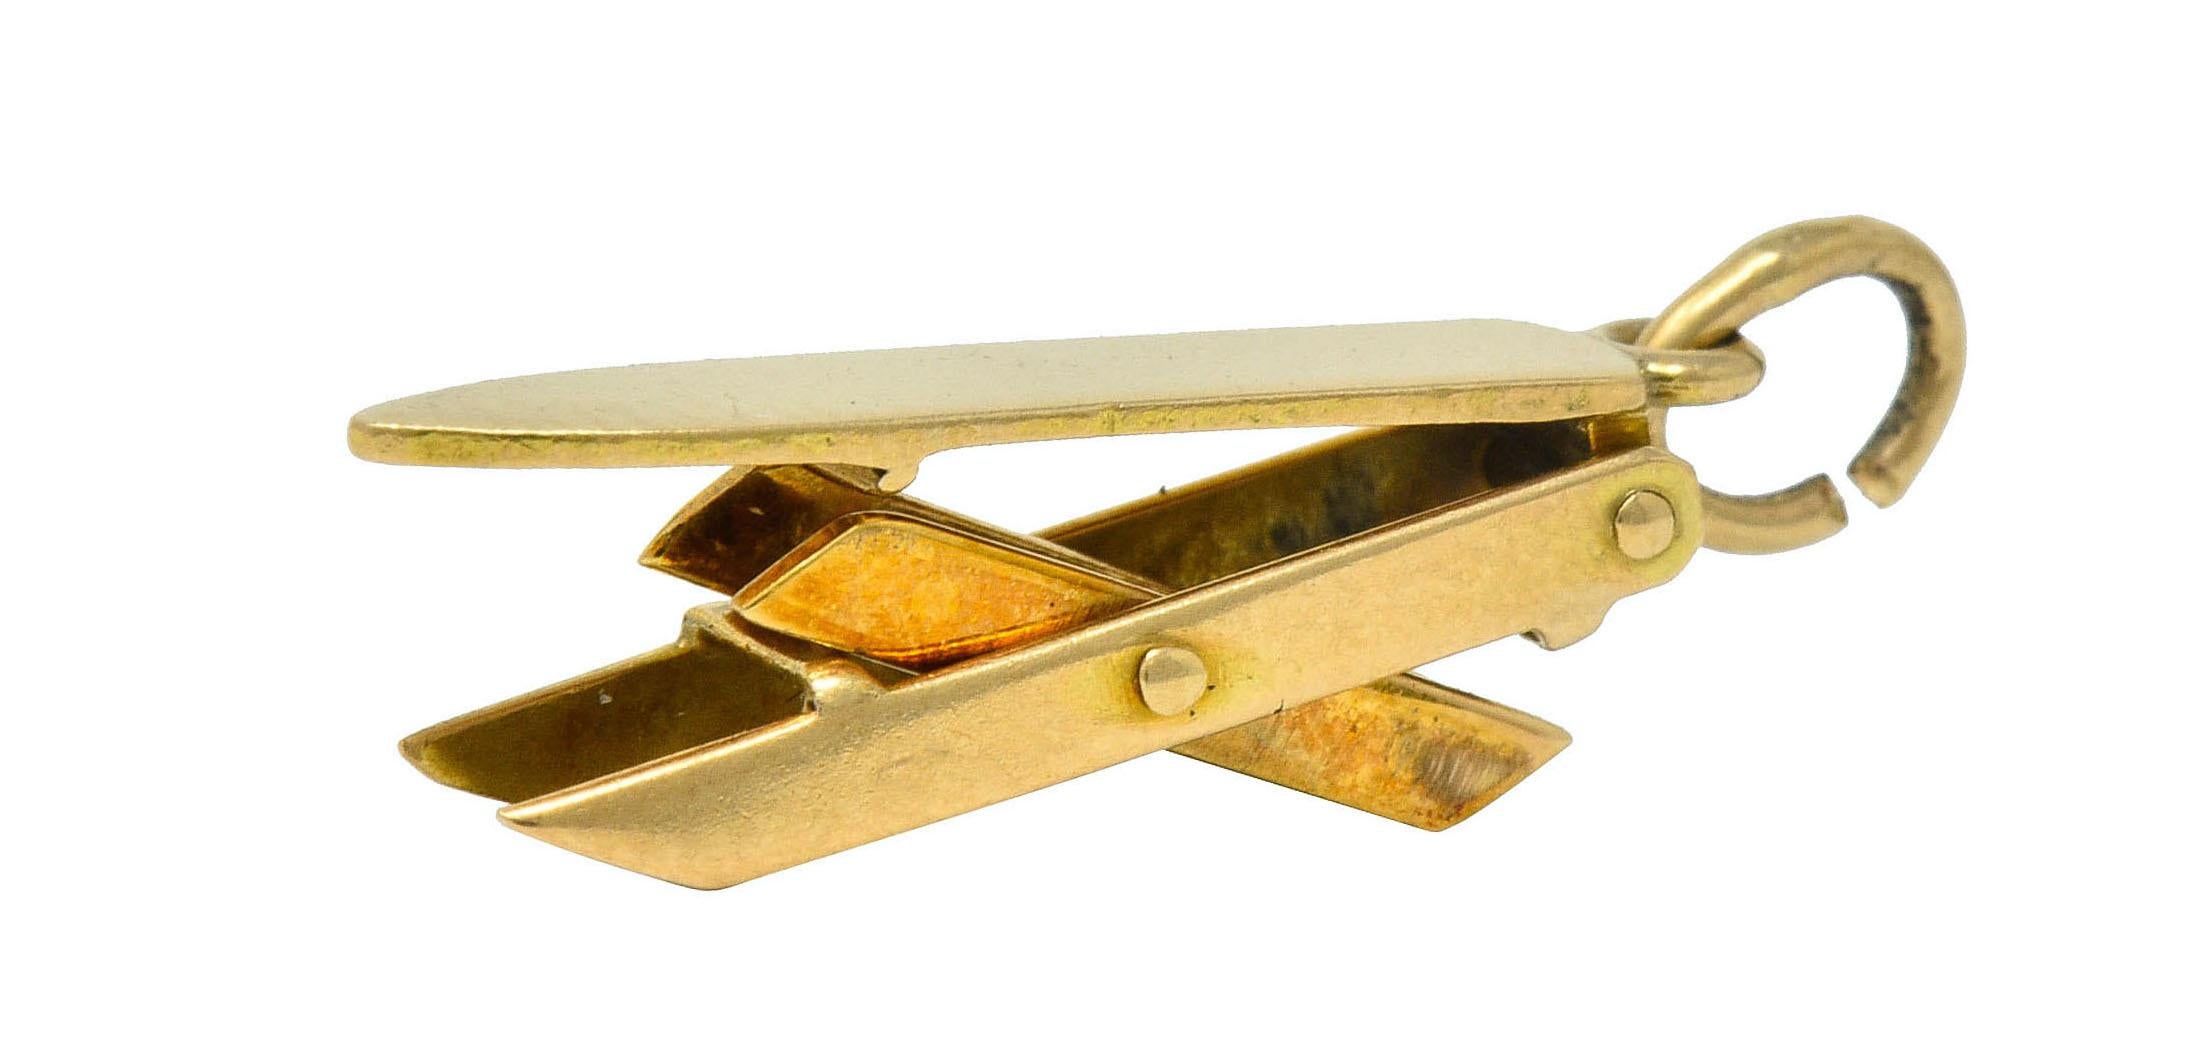 Ironing board charm fully articulates

With base that folds open to support polished gold board

Completed by jump ring bale

Stamped 14K for 14 karat gold

Circa: 1950s

Measures: 3/16 x 7/8 inch

Total weight: 1.2 grams

Functional. Whimsical.